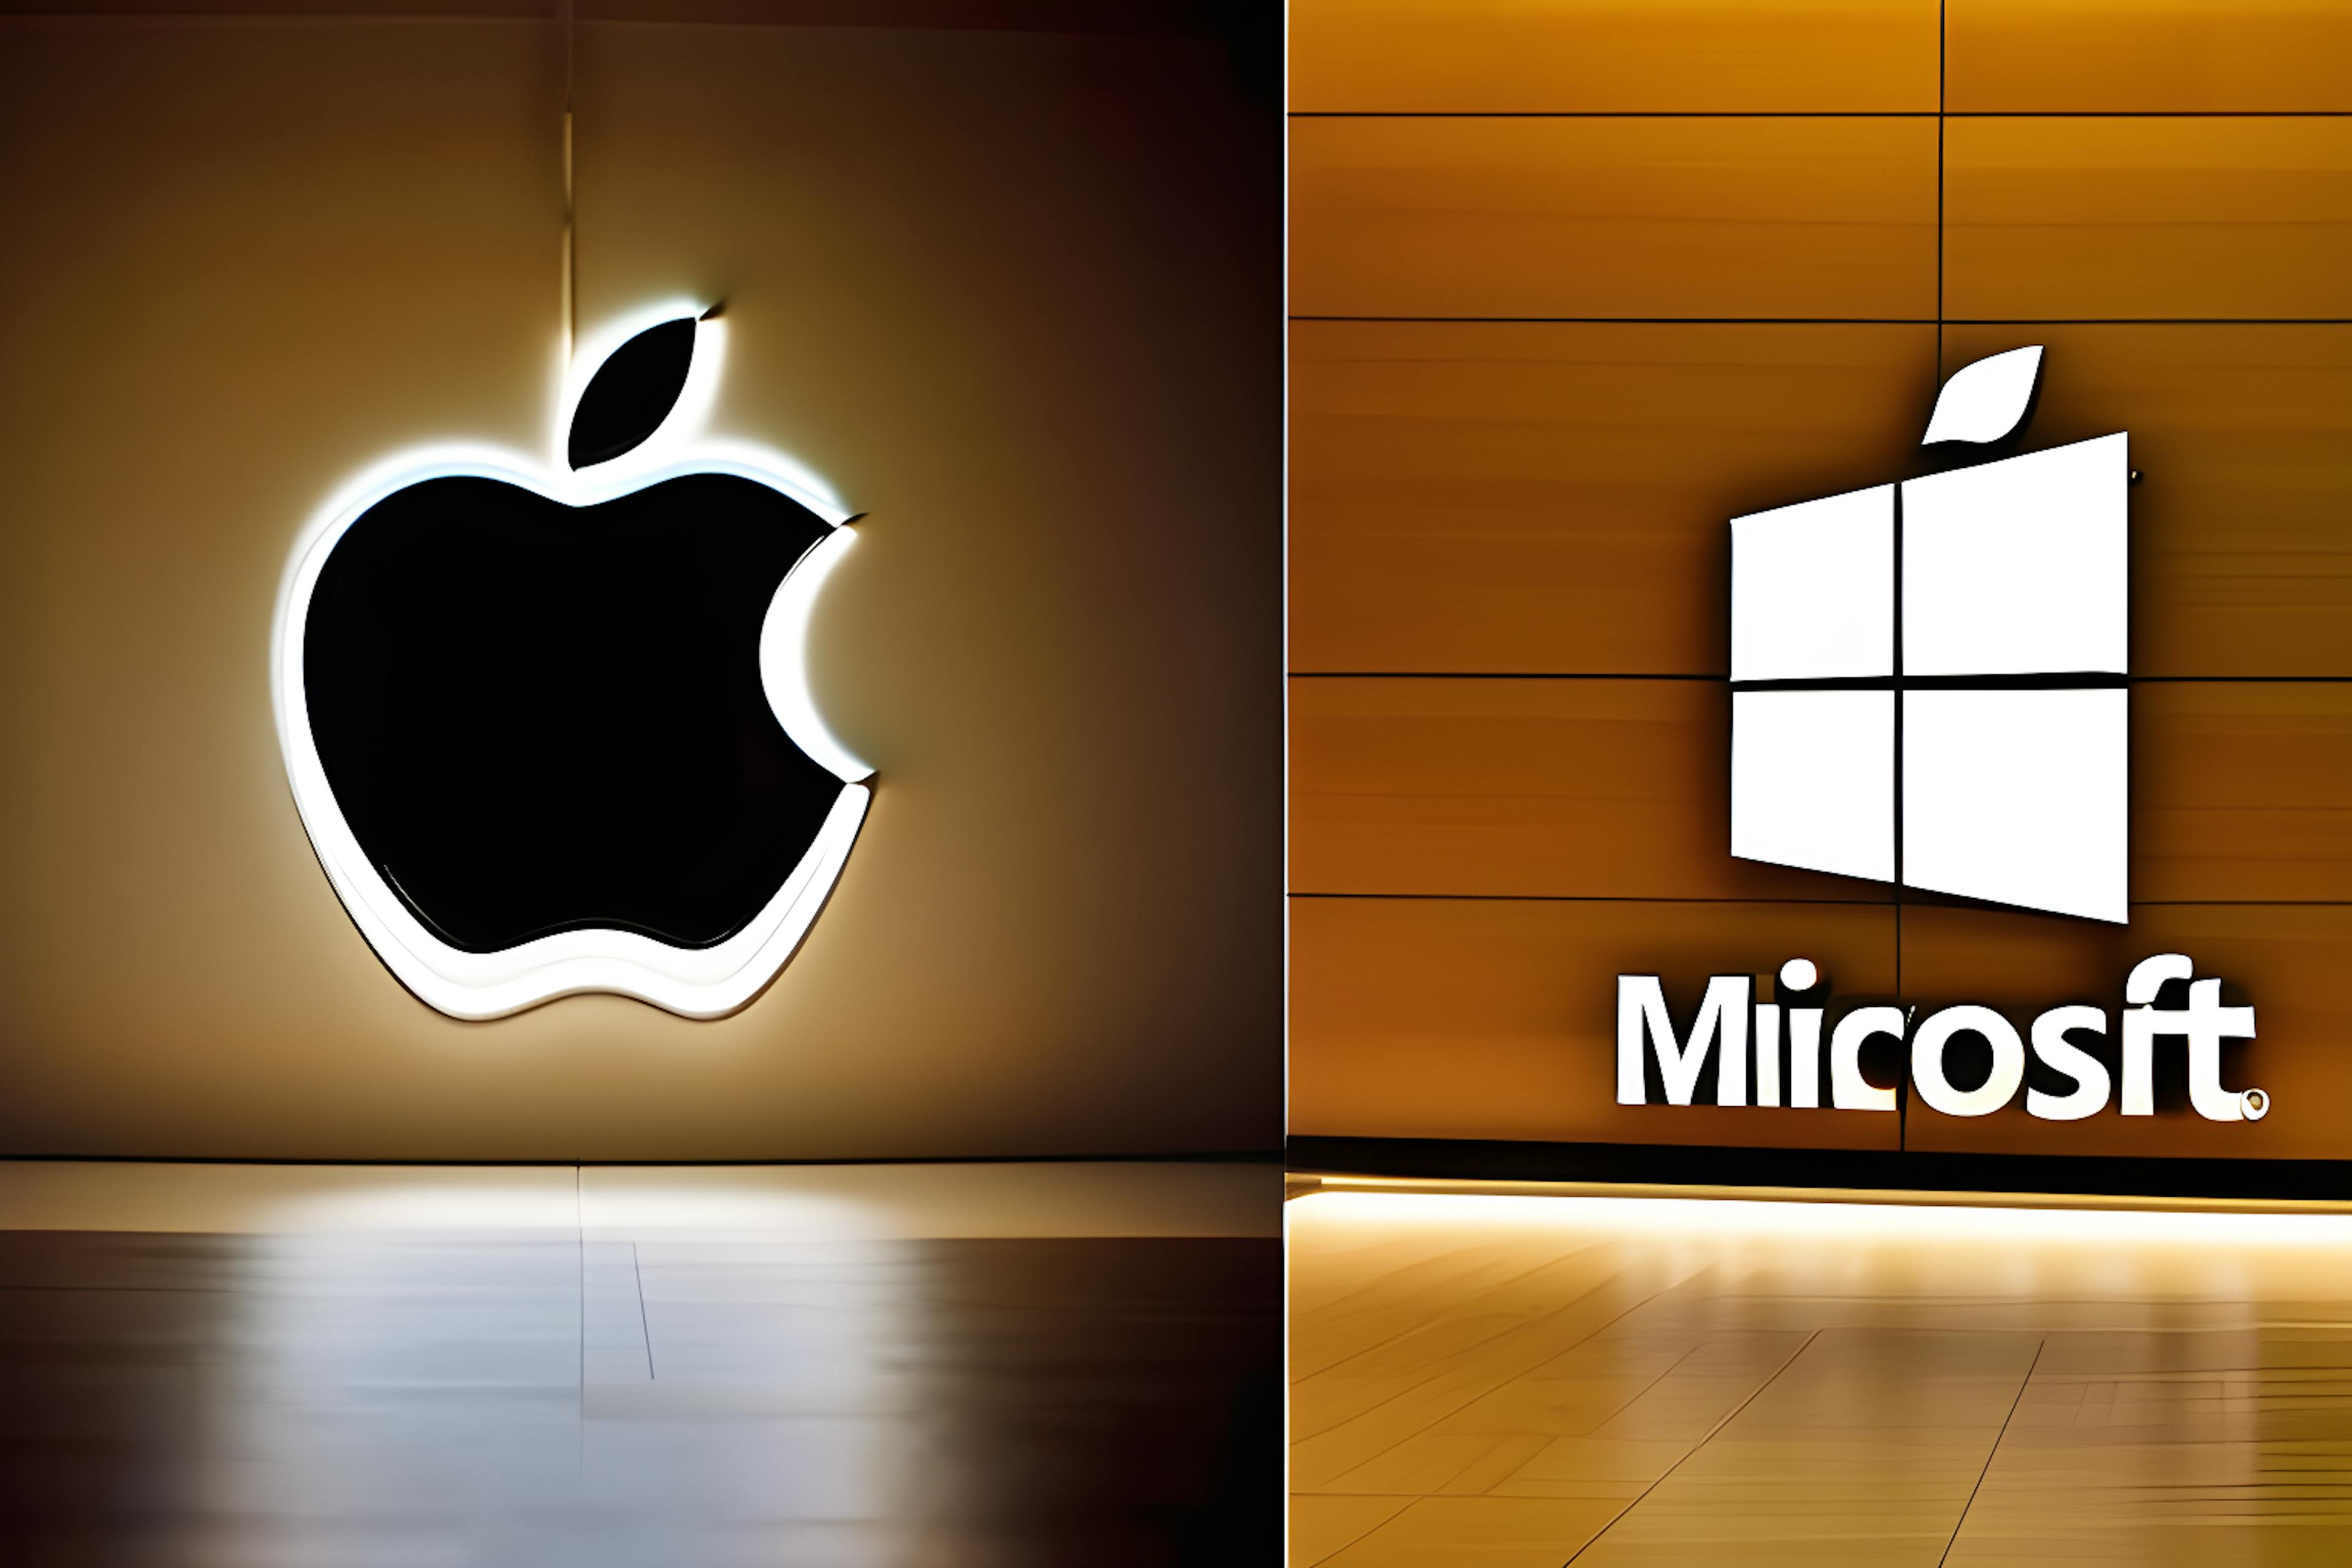 featured image - Microsoft, Apple Trade Blows For Top Spot